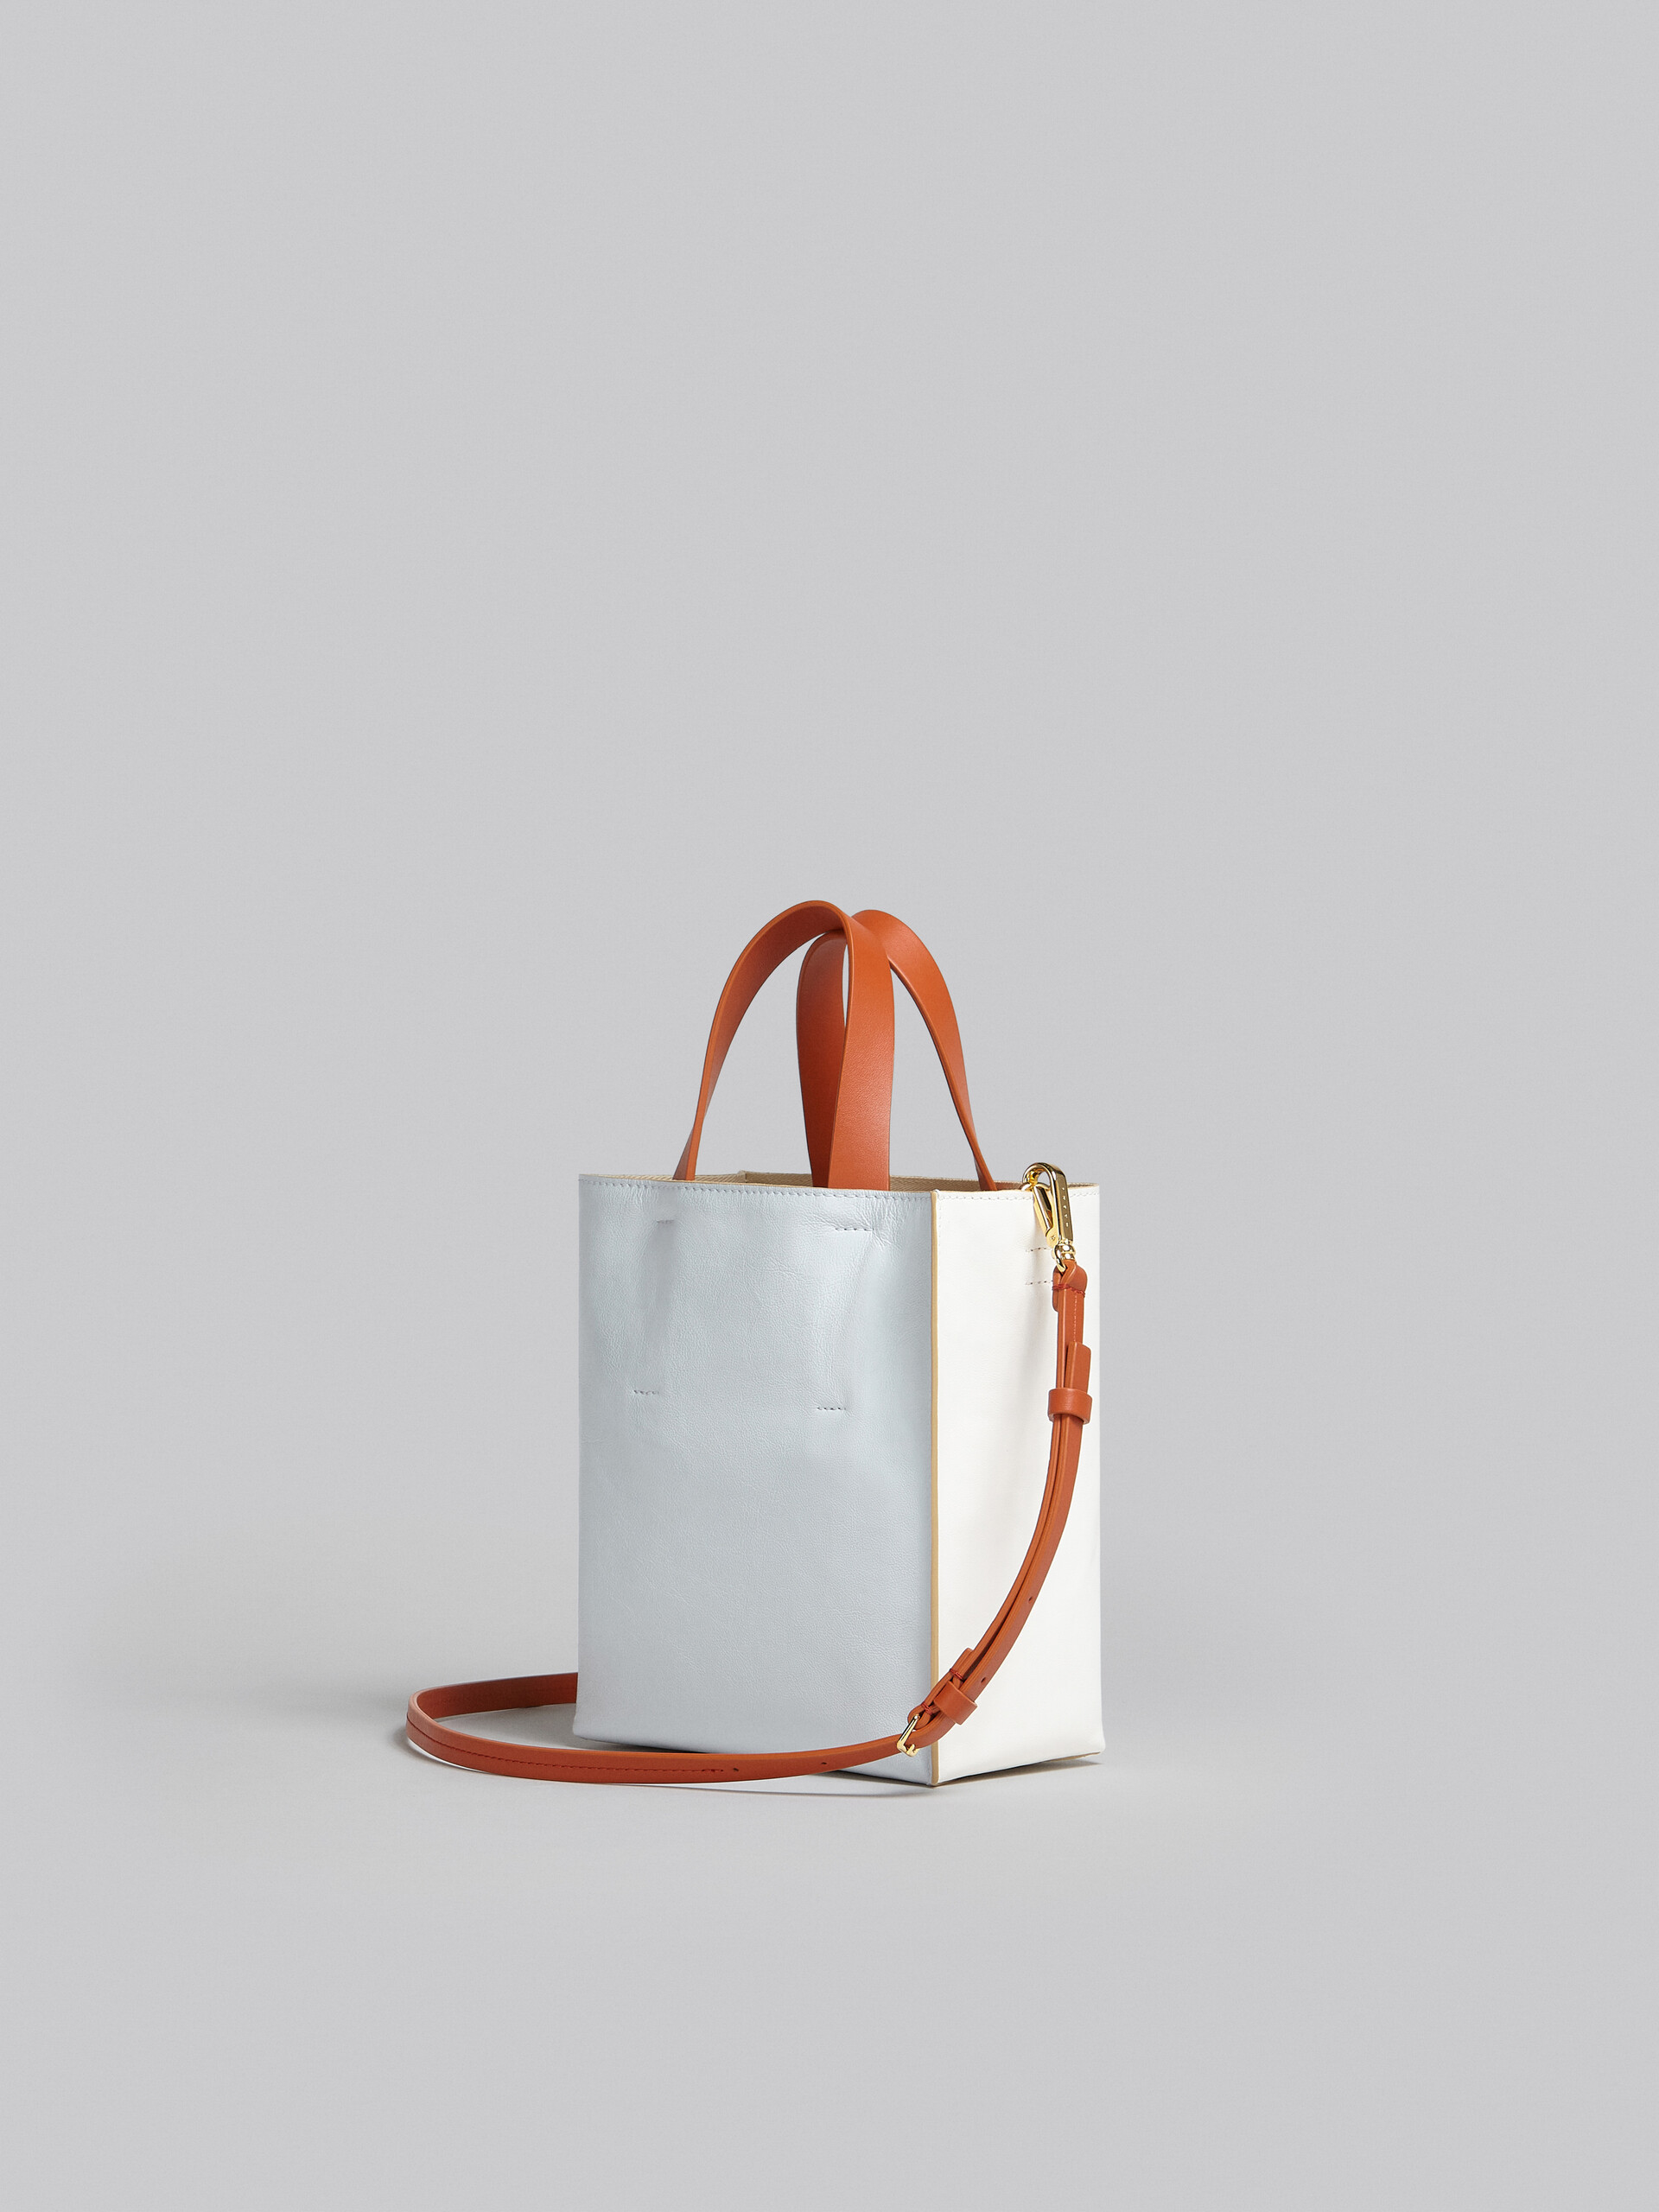 Museo Soft Mini Bag in white light blue and orange leather - Shopping Bags - Image 3